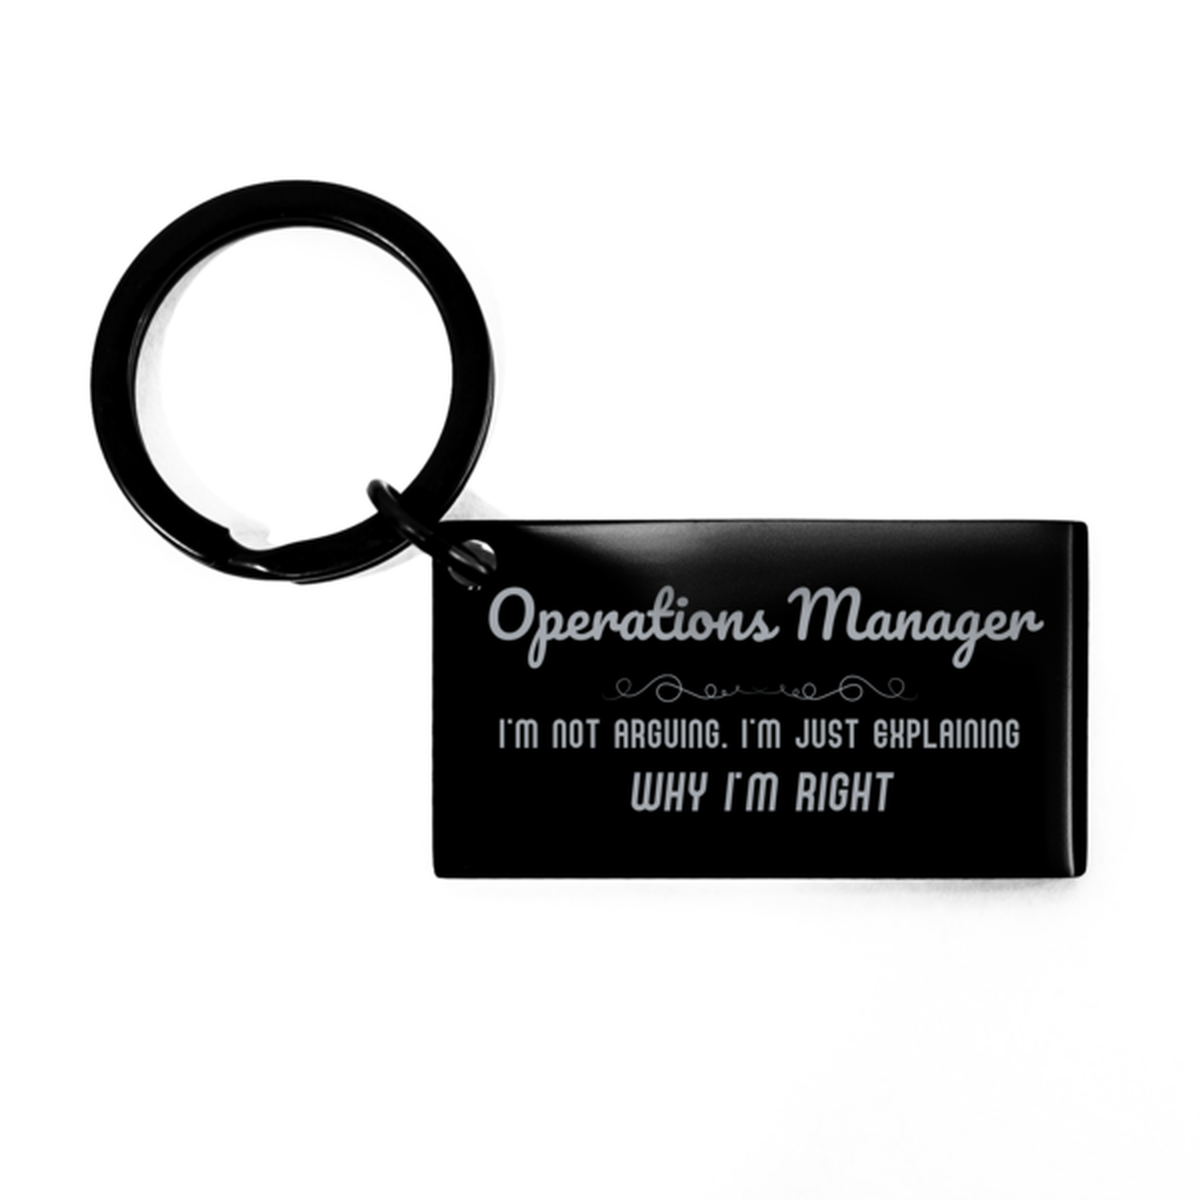 Operations Manager I'm not Arguing. I'm Just Explaining Why I'm RIGHT Keychain, Funny Saying Quote Operations Manager Gifts For Operations Manager Graduation Birthday Christmas Gifts for Men Women Coworker